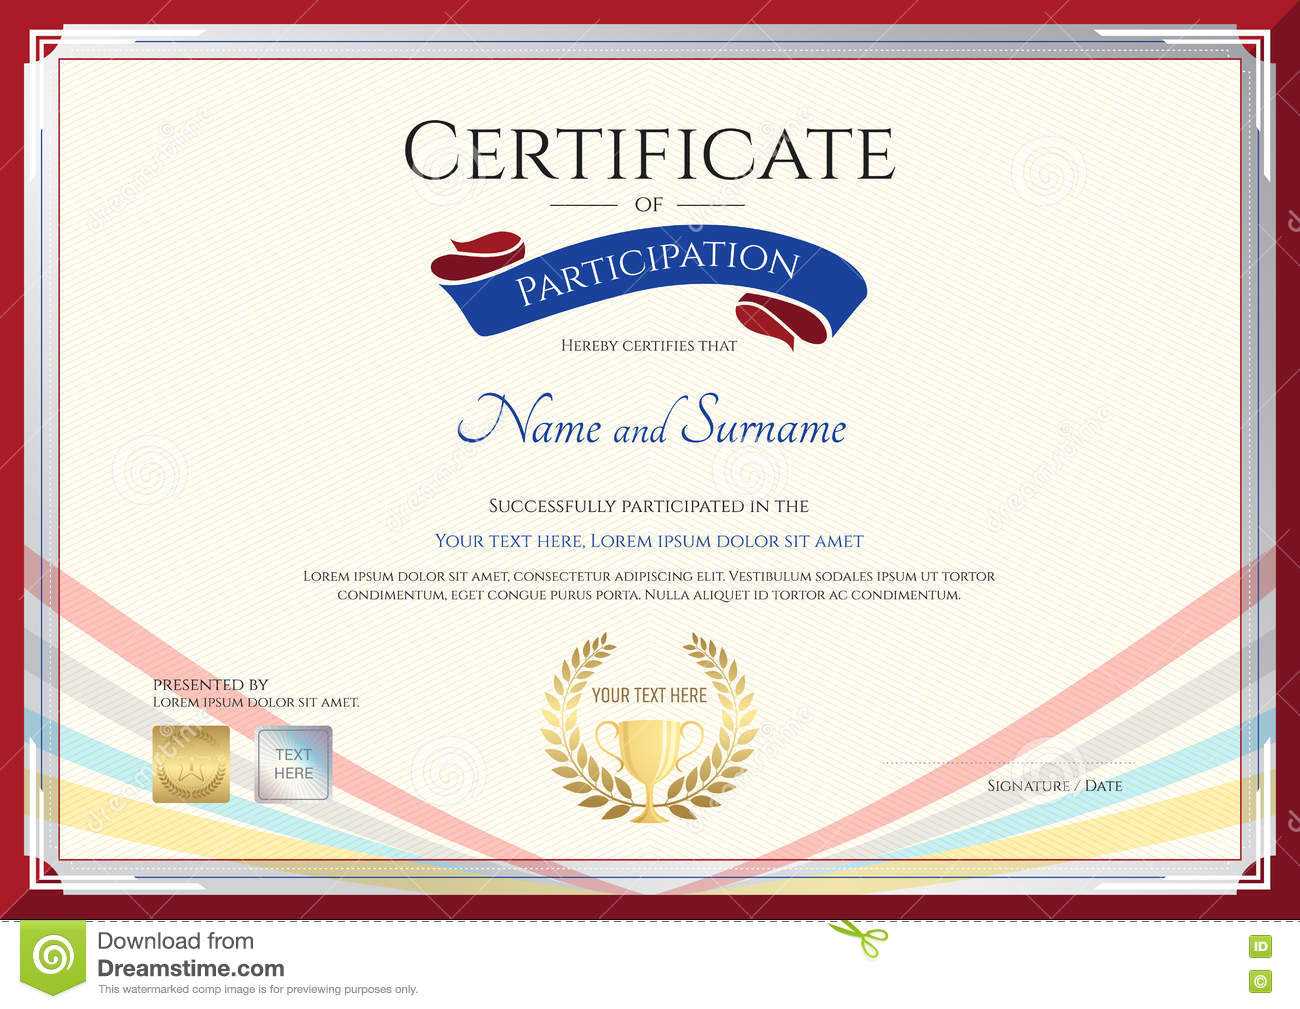 Certificate Template For Achievement, Appreciation Or Within Participation Certificate Templates Free Download